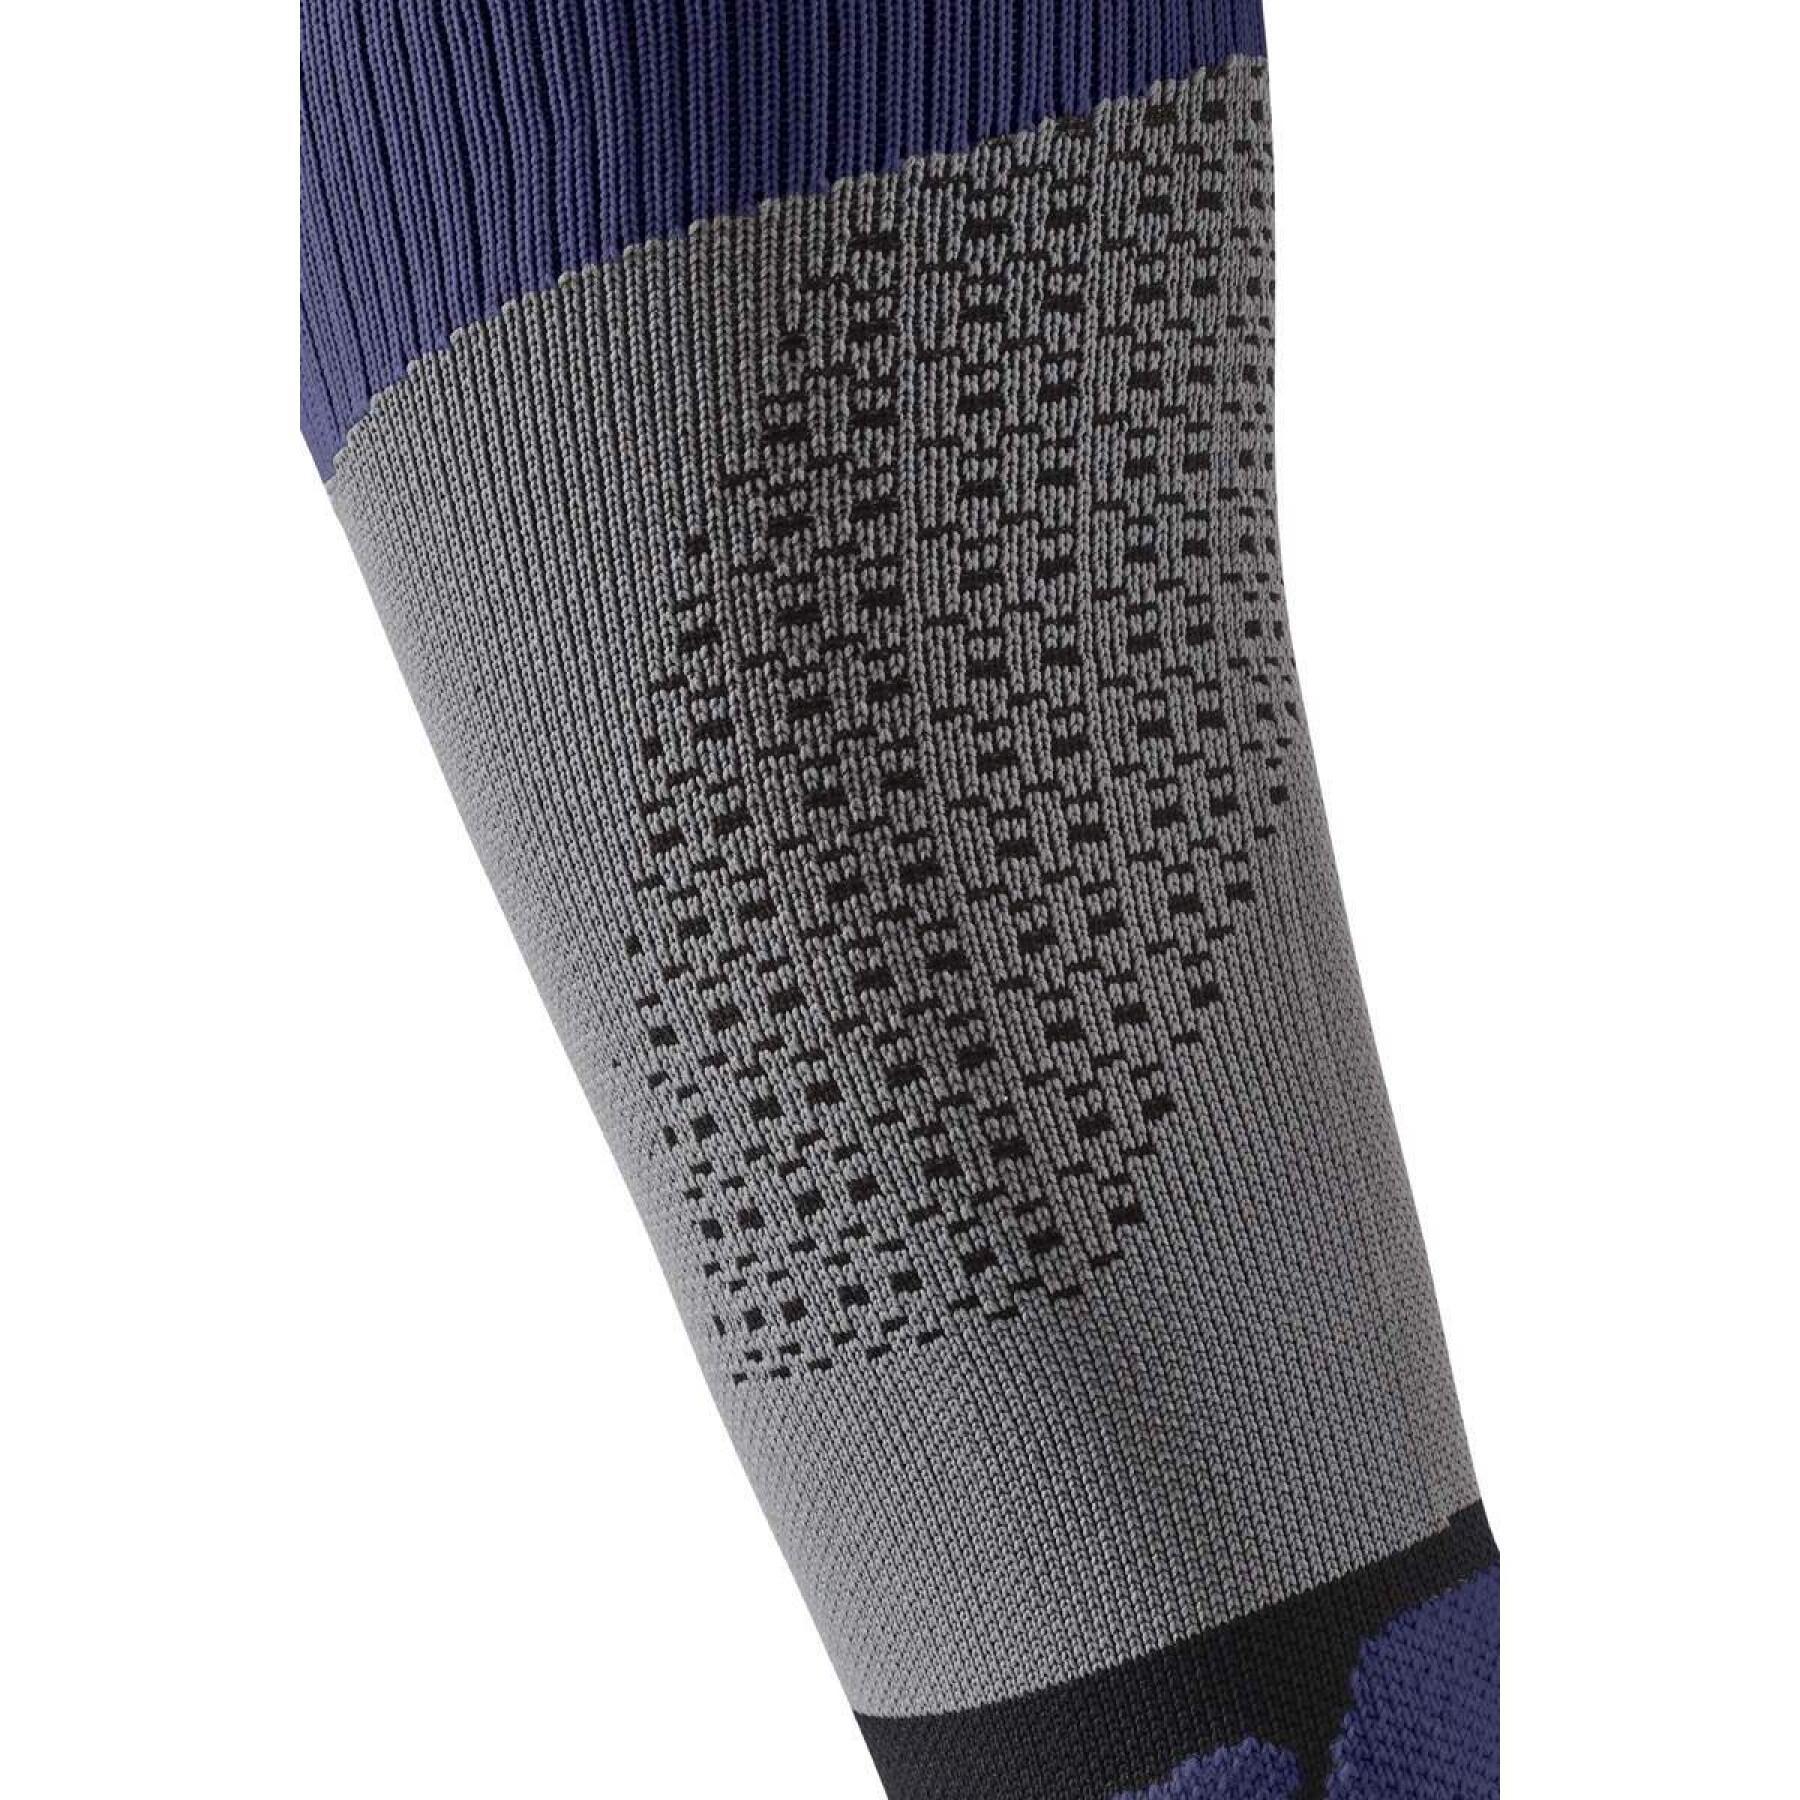 Calcetines de mujer CEP Compression Max cushion Tall